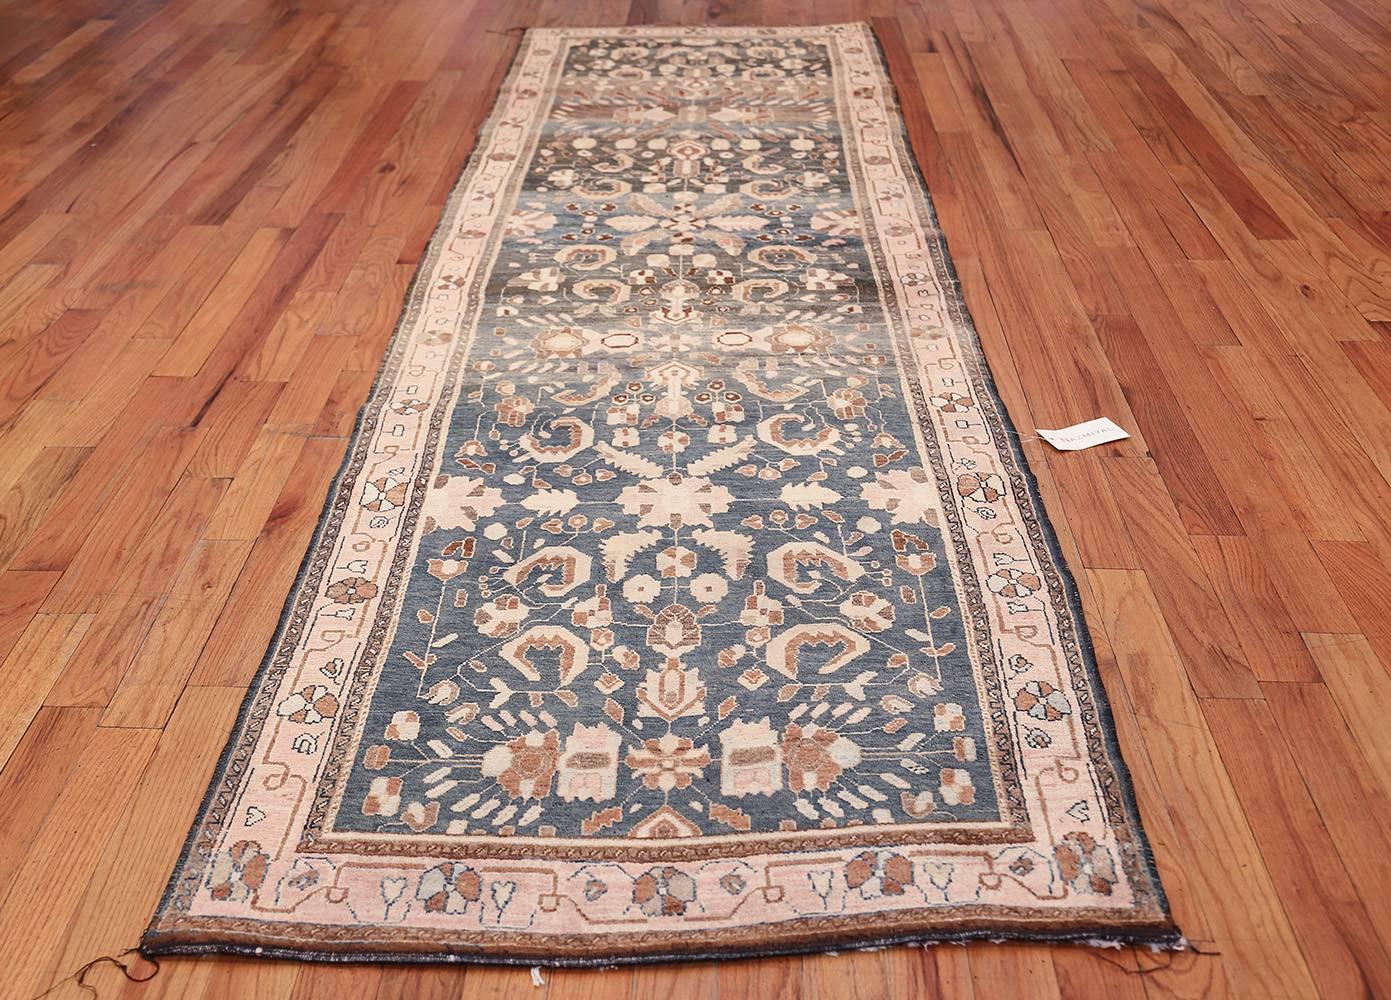 Antique Khorassan Persian Runner Rug. Size: 3 ft 6 in x 12 ft 10 in  1